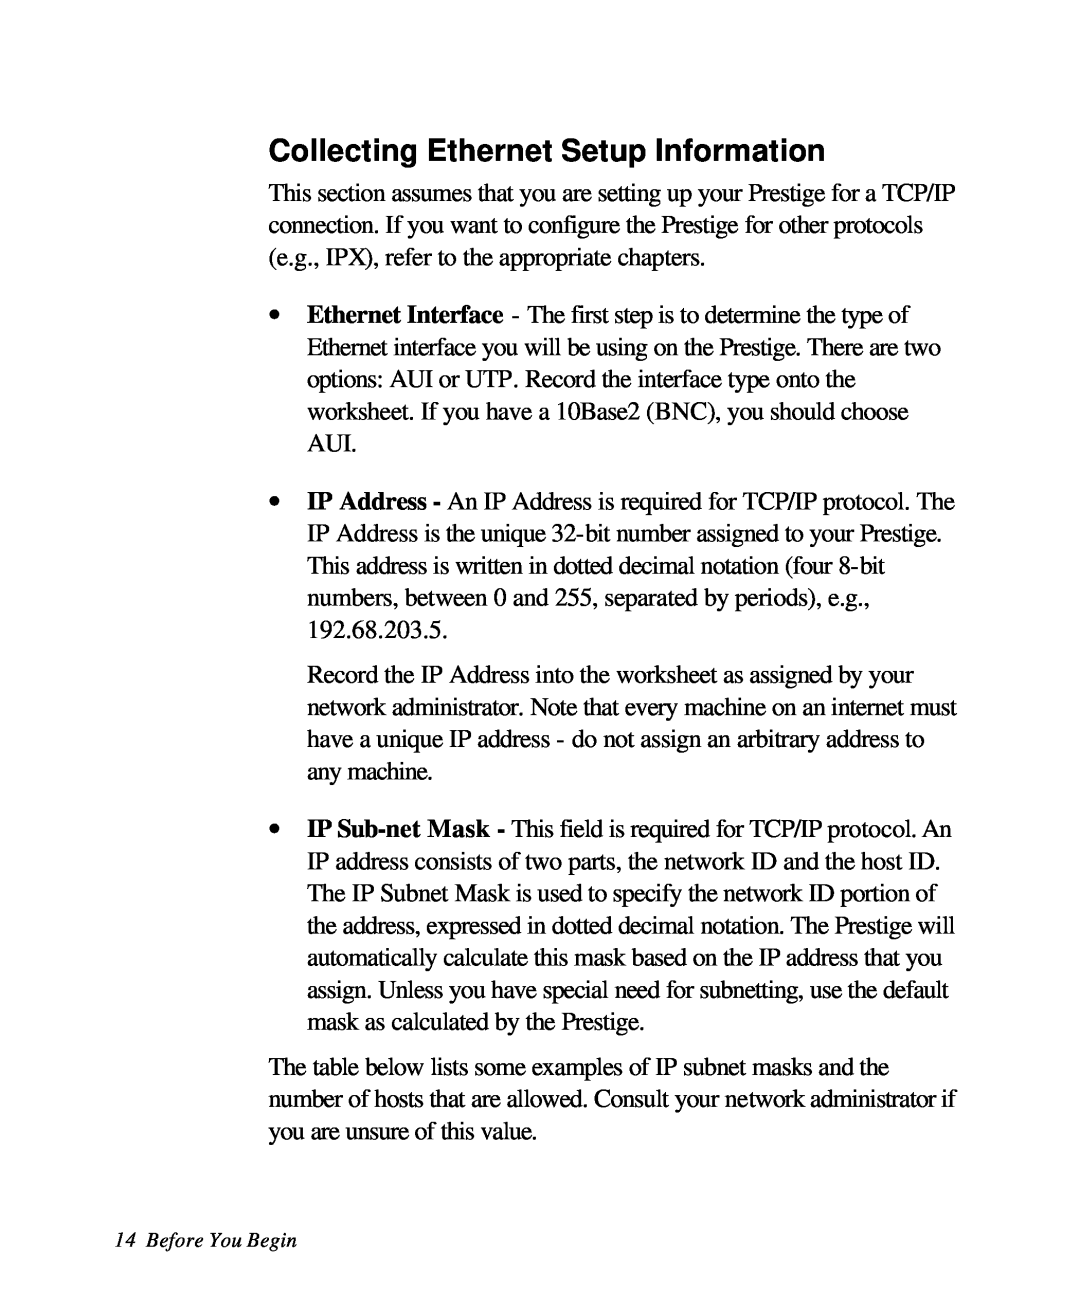 ZyXEL Communications 28641 user manual Collecting Ethernet Setup Information, Before You Begin 